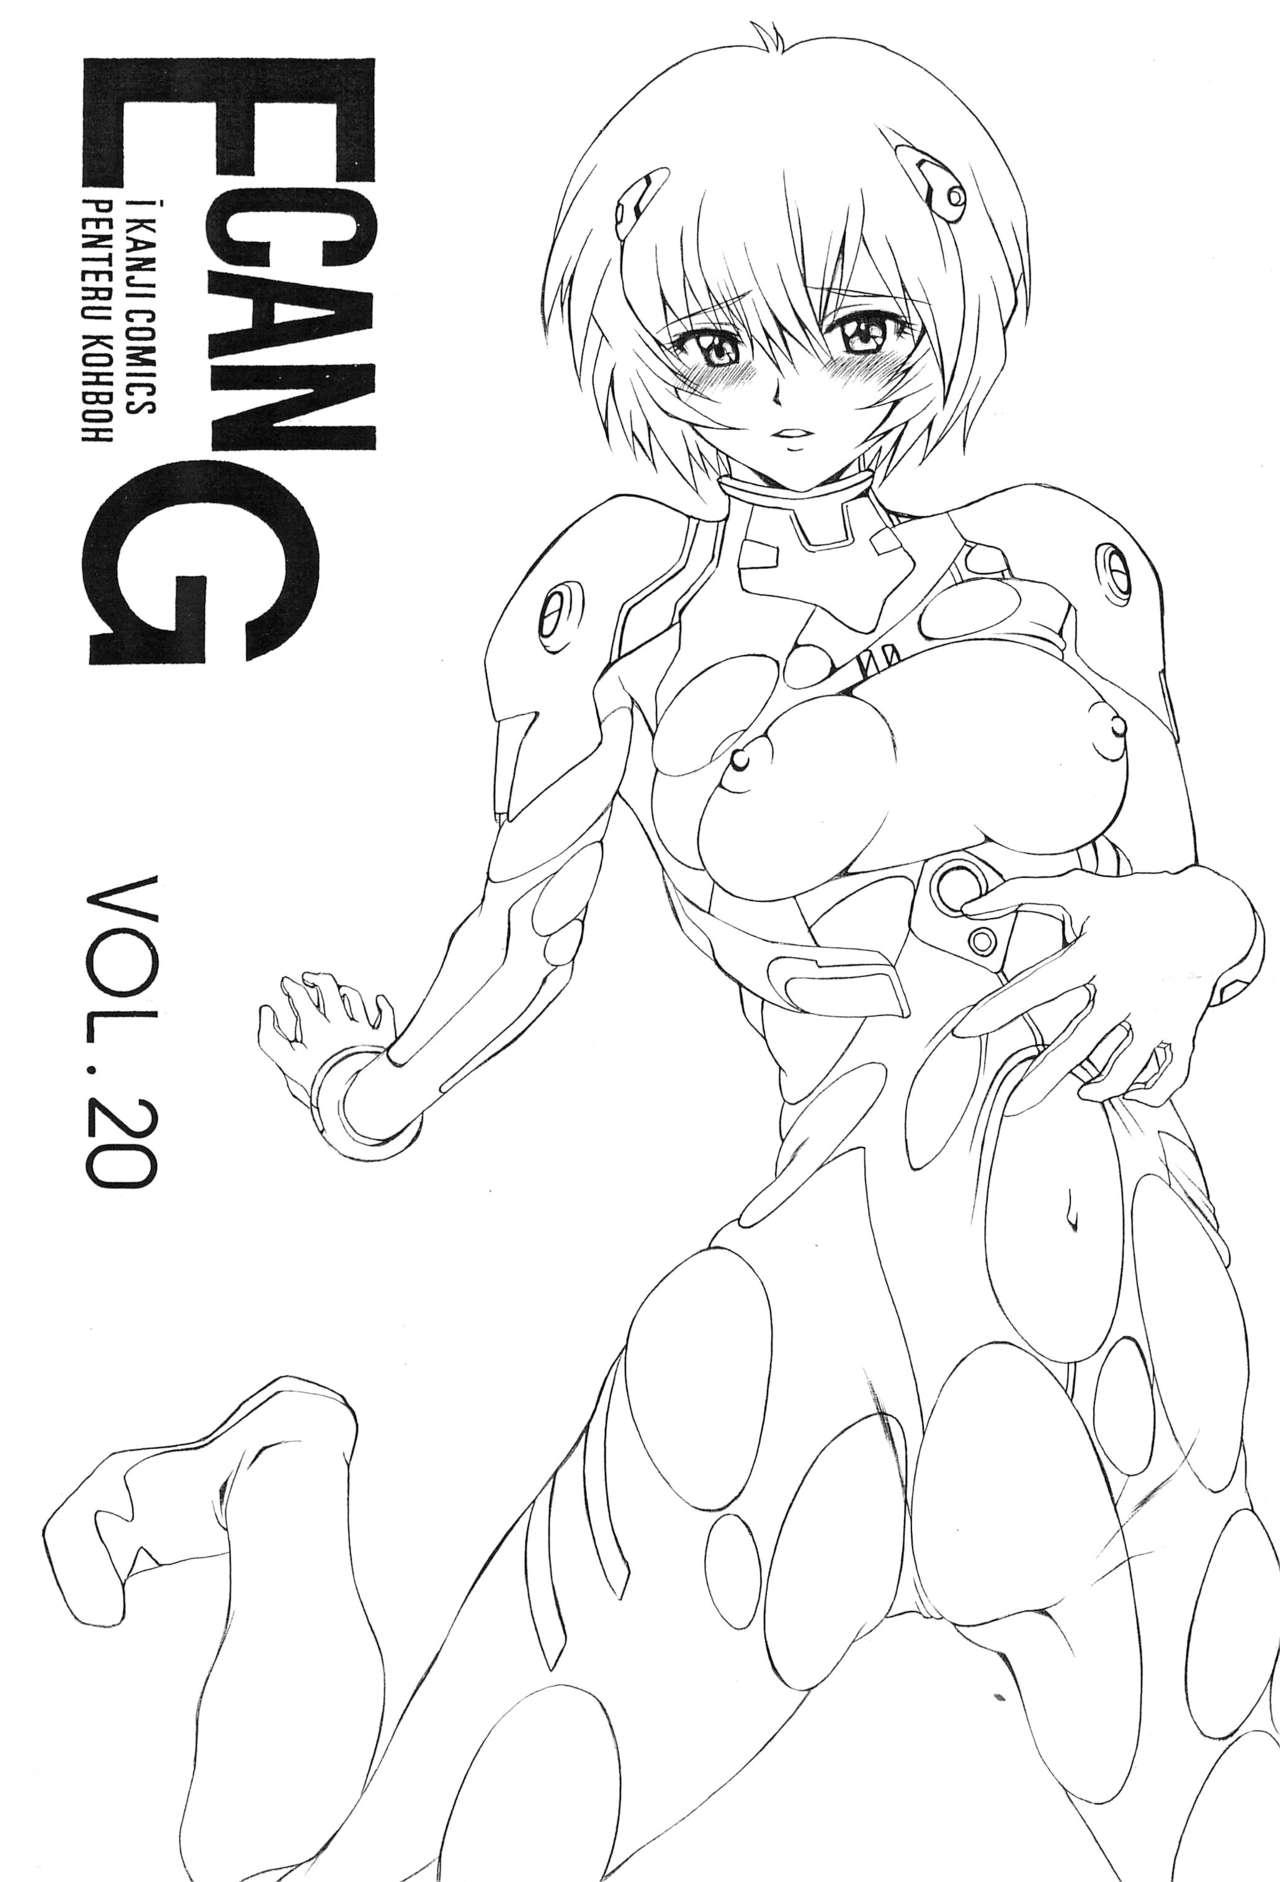 Street Fuck E can G vol.20 - Neon genesis evangelion Gay Straight - Page 1